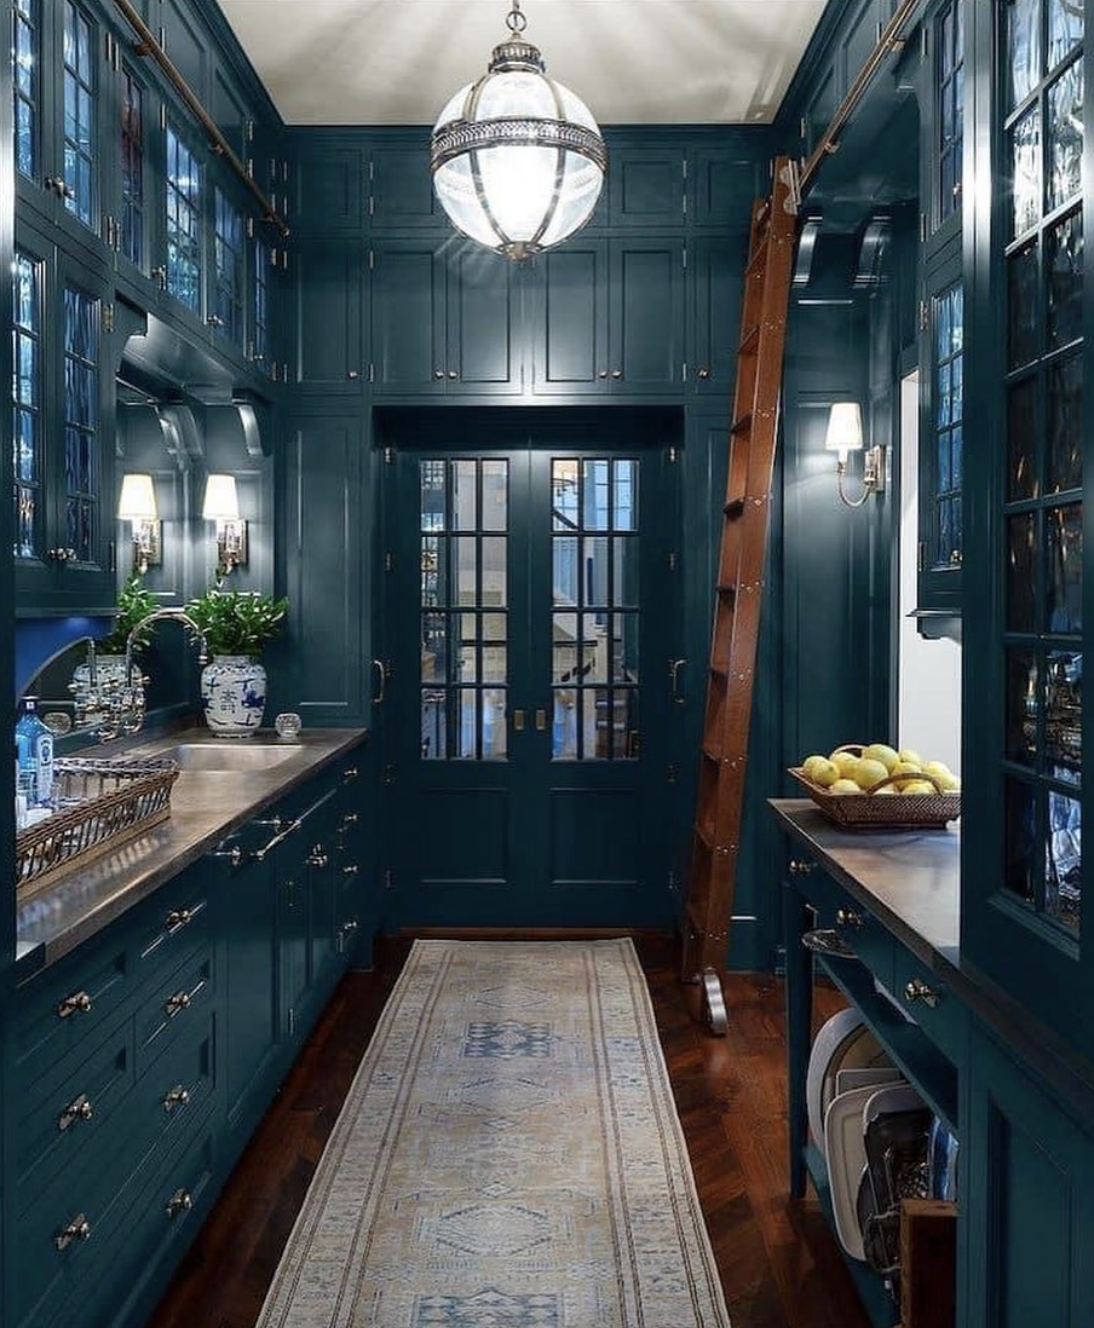 Rich Blue Cabinets For A Distinguished Look